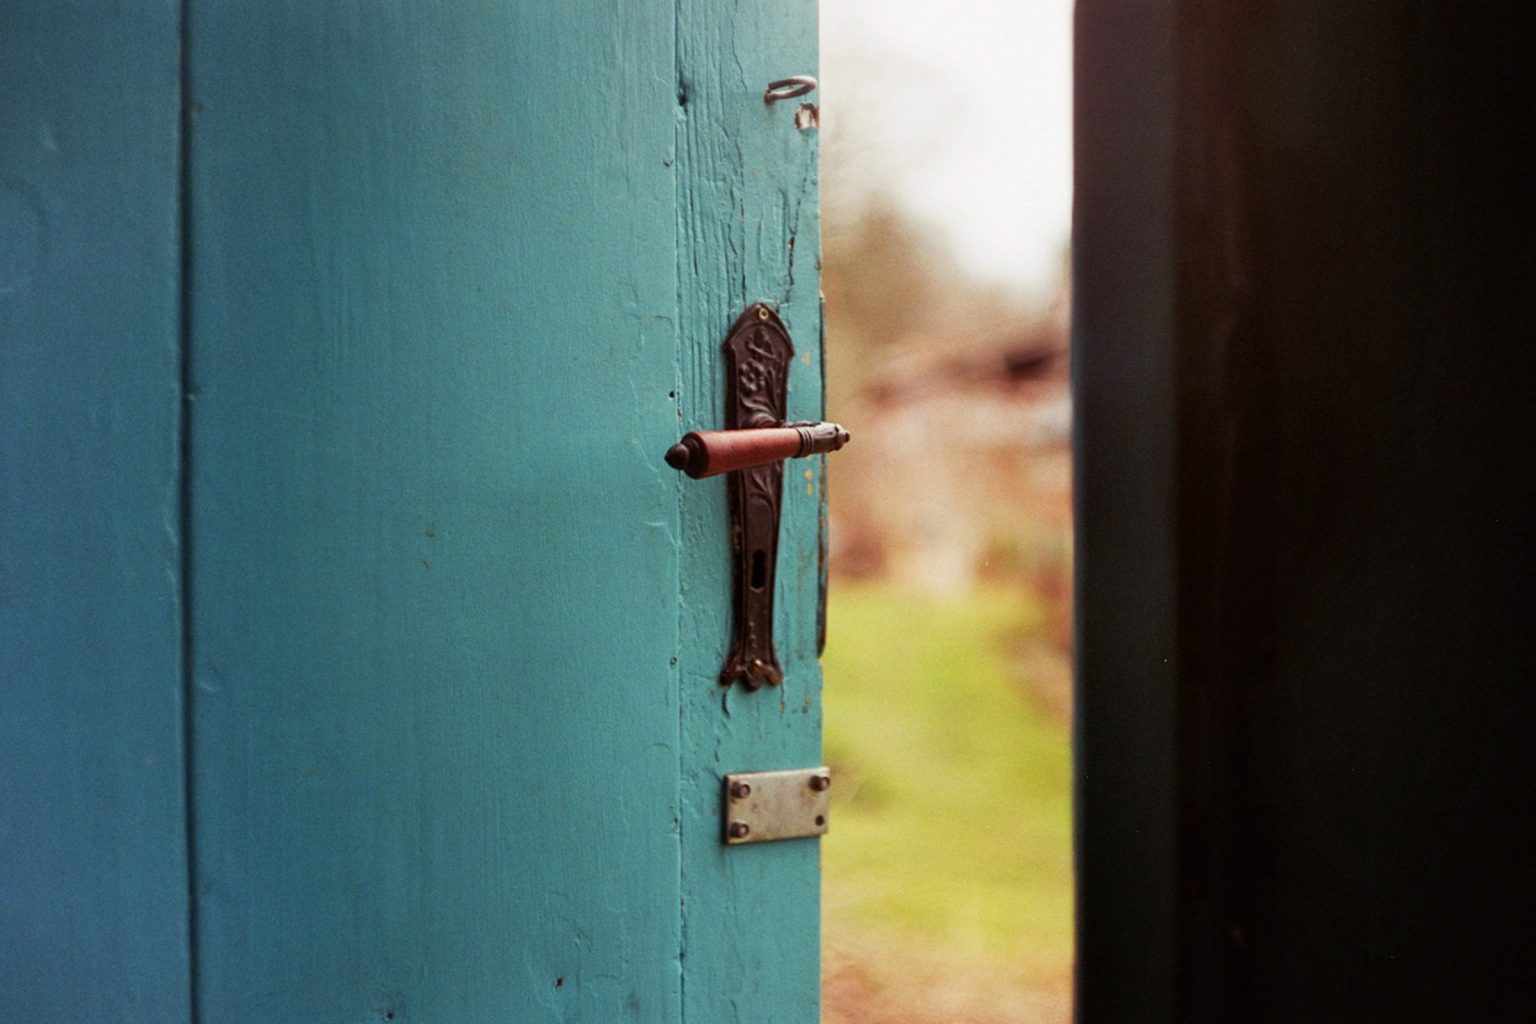 Photograph of an ornate handle on a teal painted wooden door, opened slightly to a green natural background.